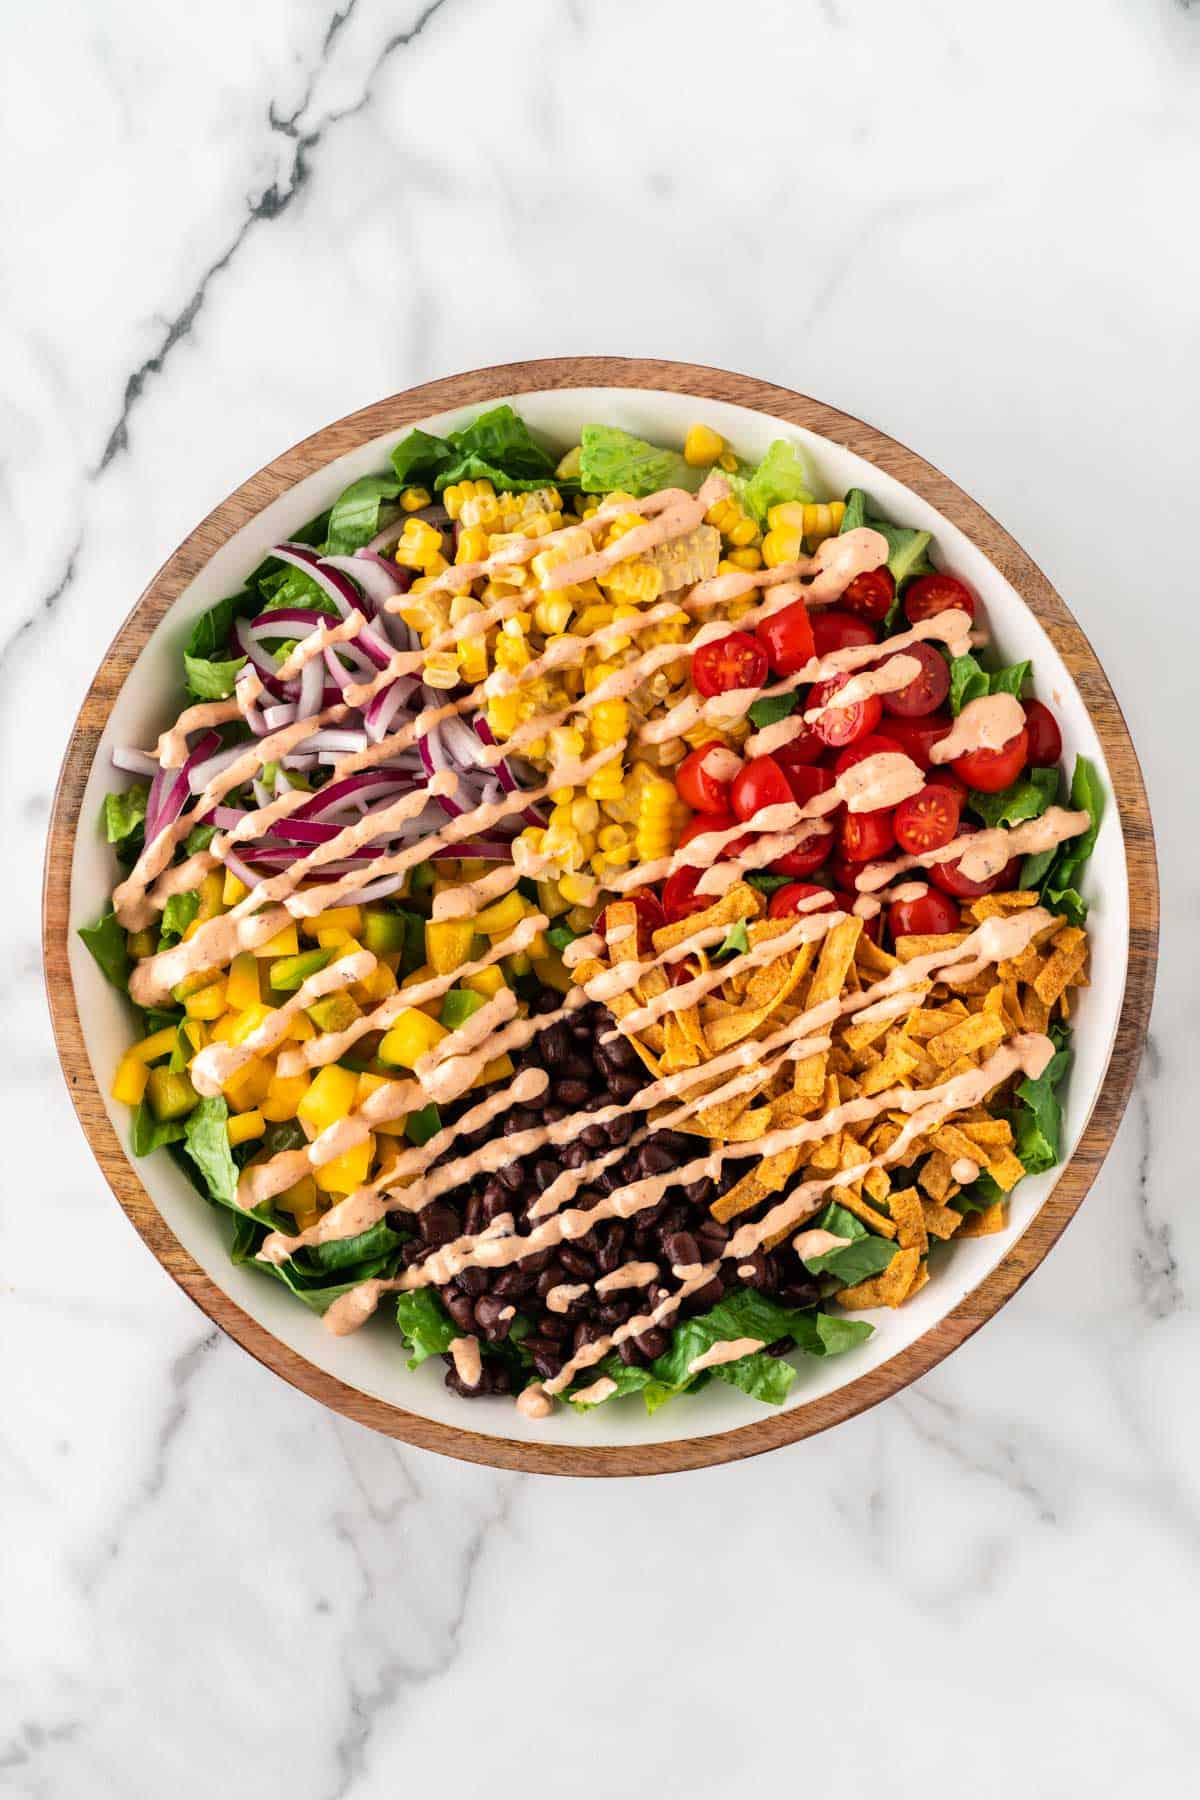 southwest salad drizzled with chipotle ranch dressing